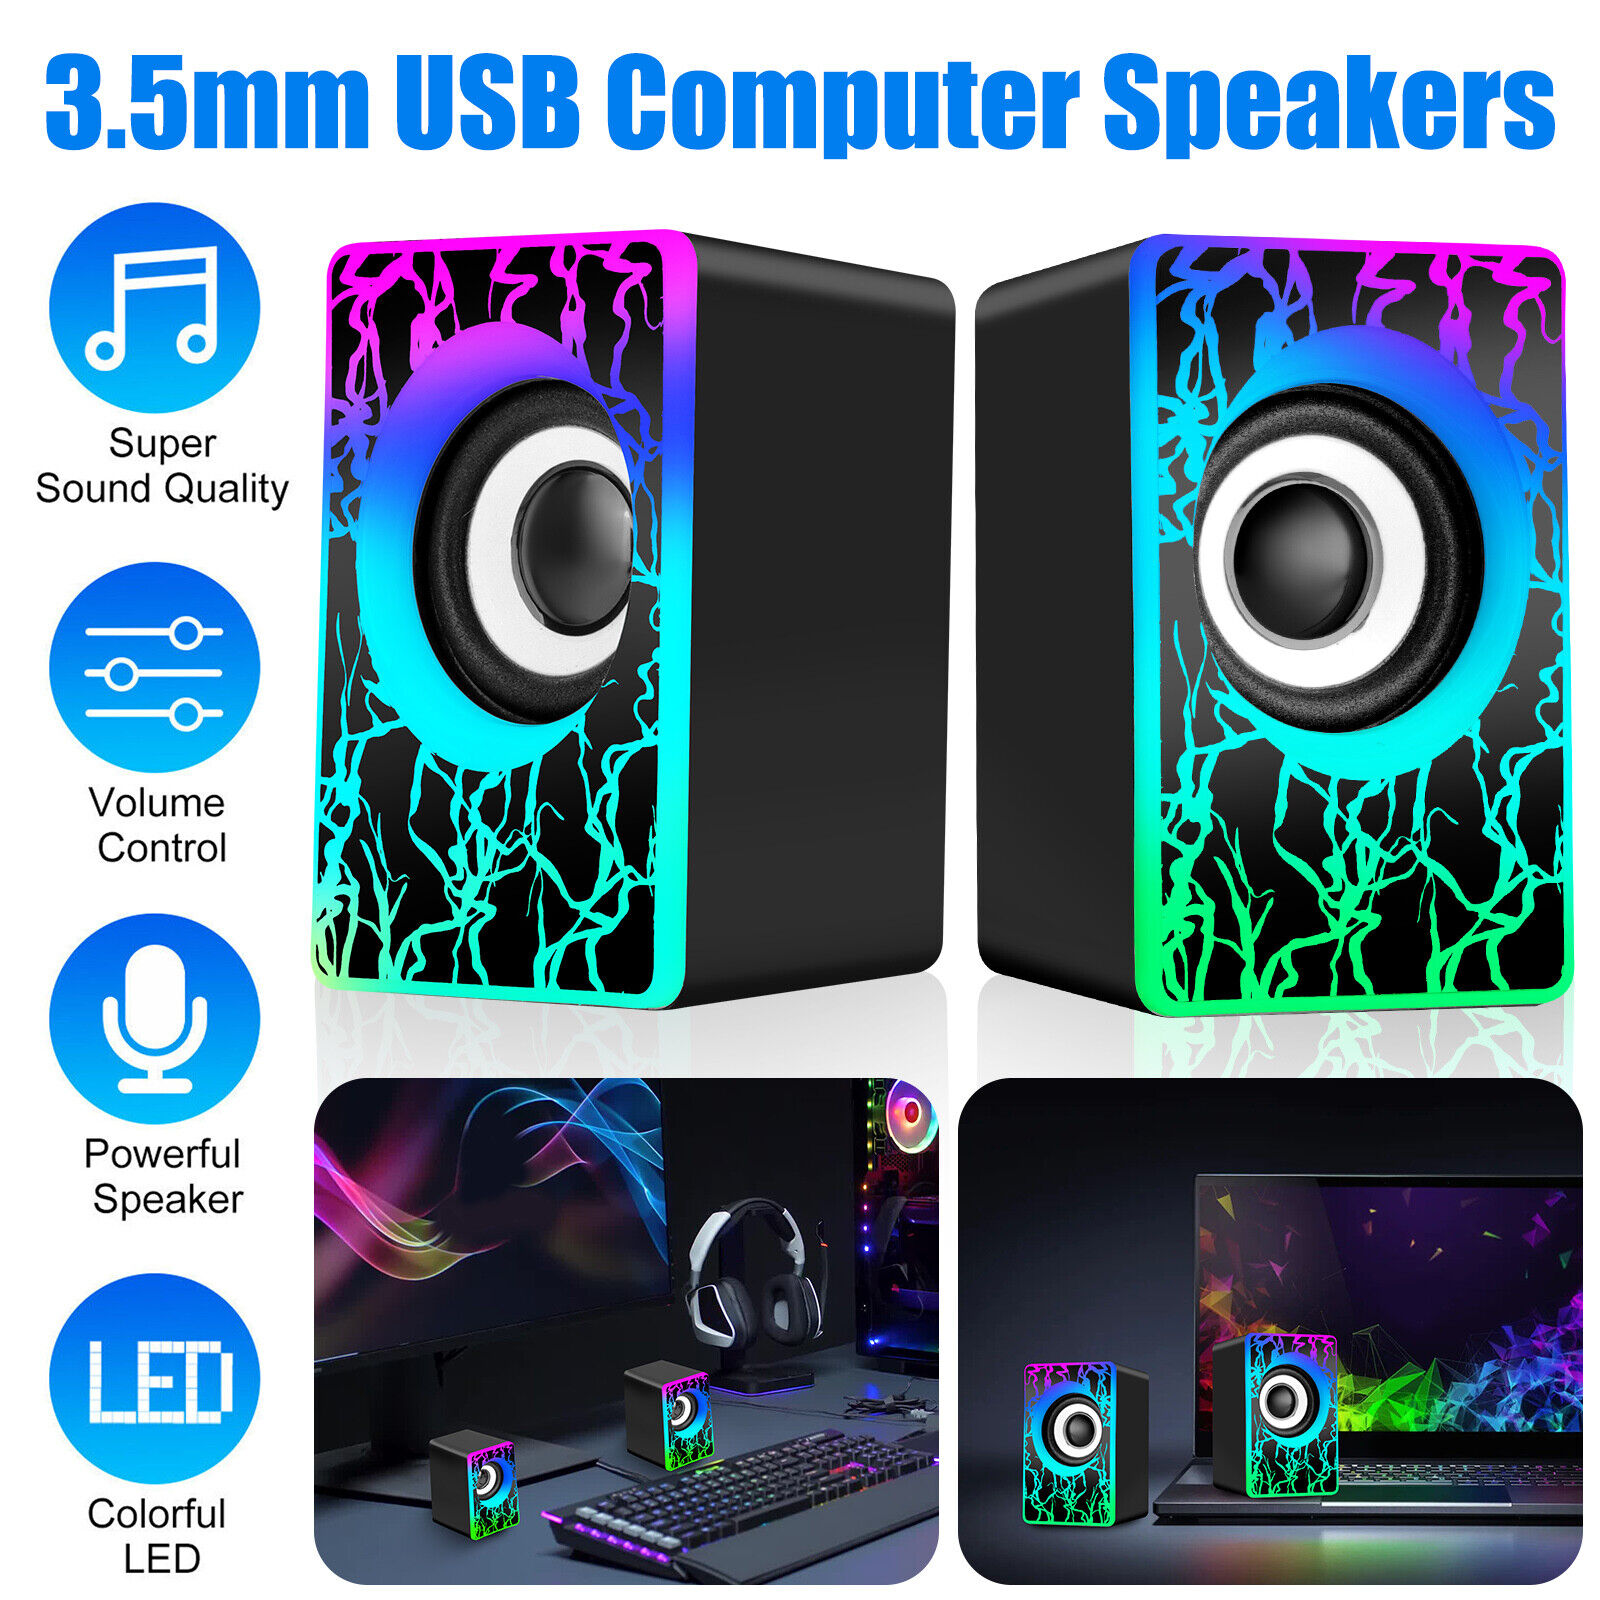 Wired Computer Speakers Subwoofer Stereo Bass Sound 3.5mm USB for Desktop Laptop